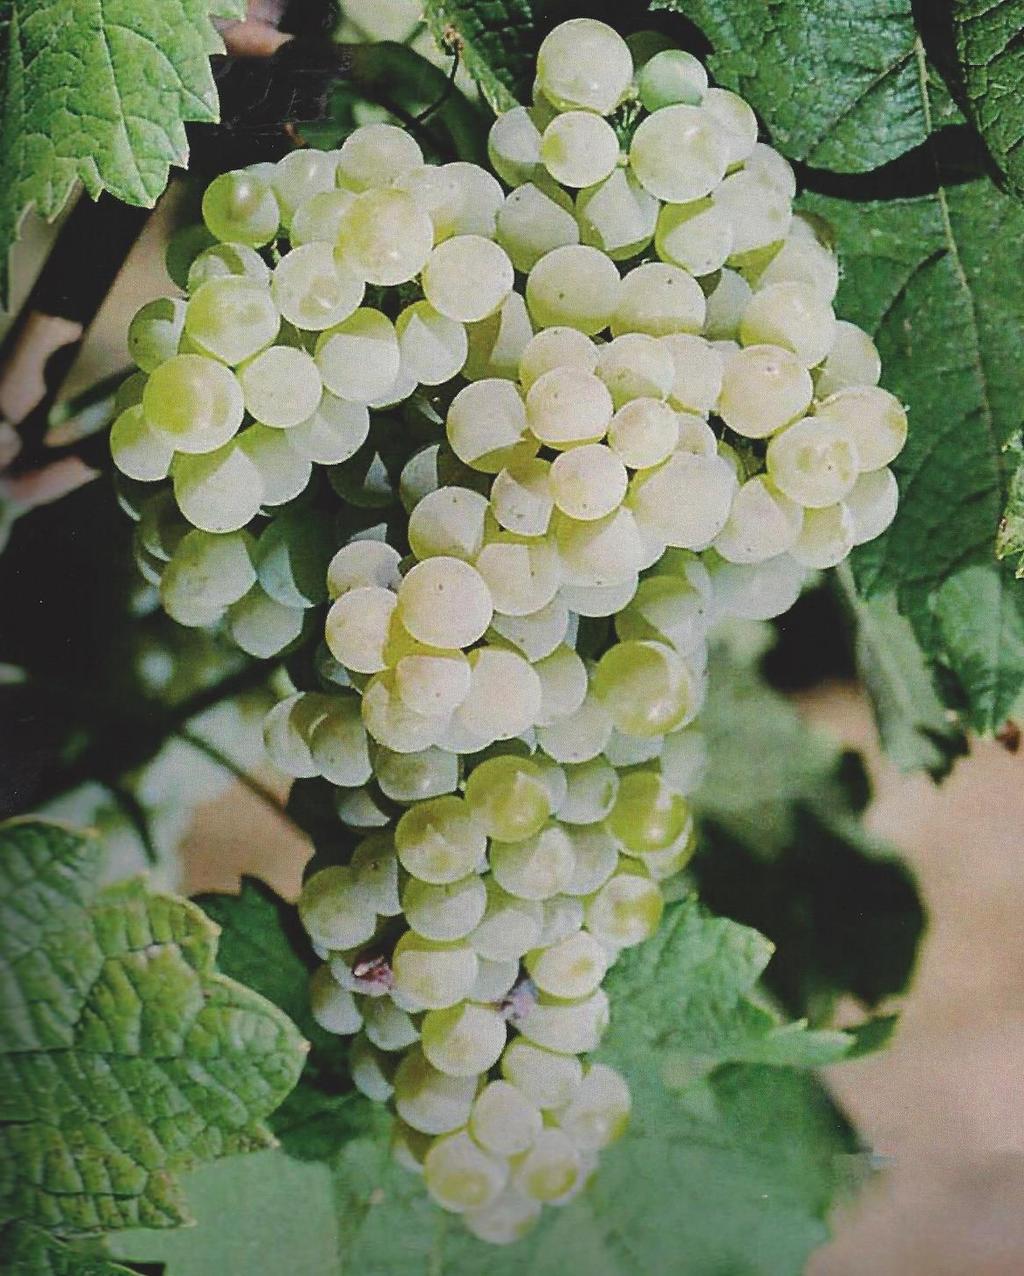 Arinto Origin: All over Portugal (likes the Atlantic) Synonyms: Pedernão (clearly distinct from Riesling) Area cultivated: 7.000 ha Pruning weight: 1.800-3.